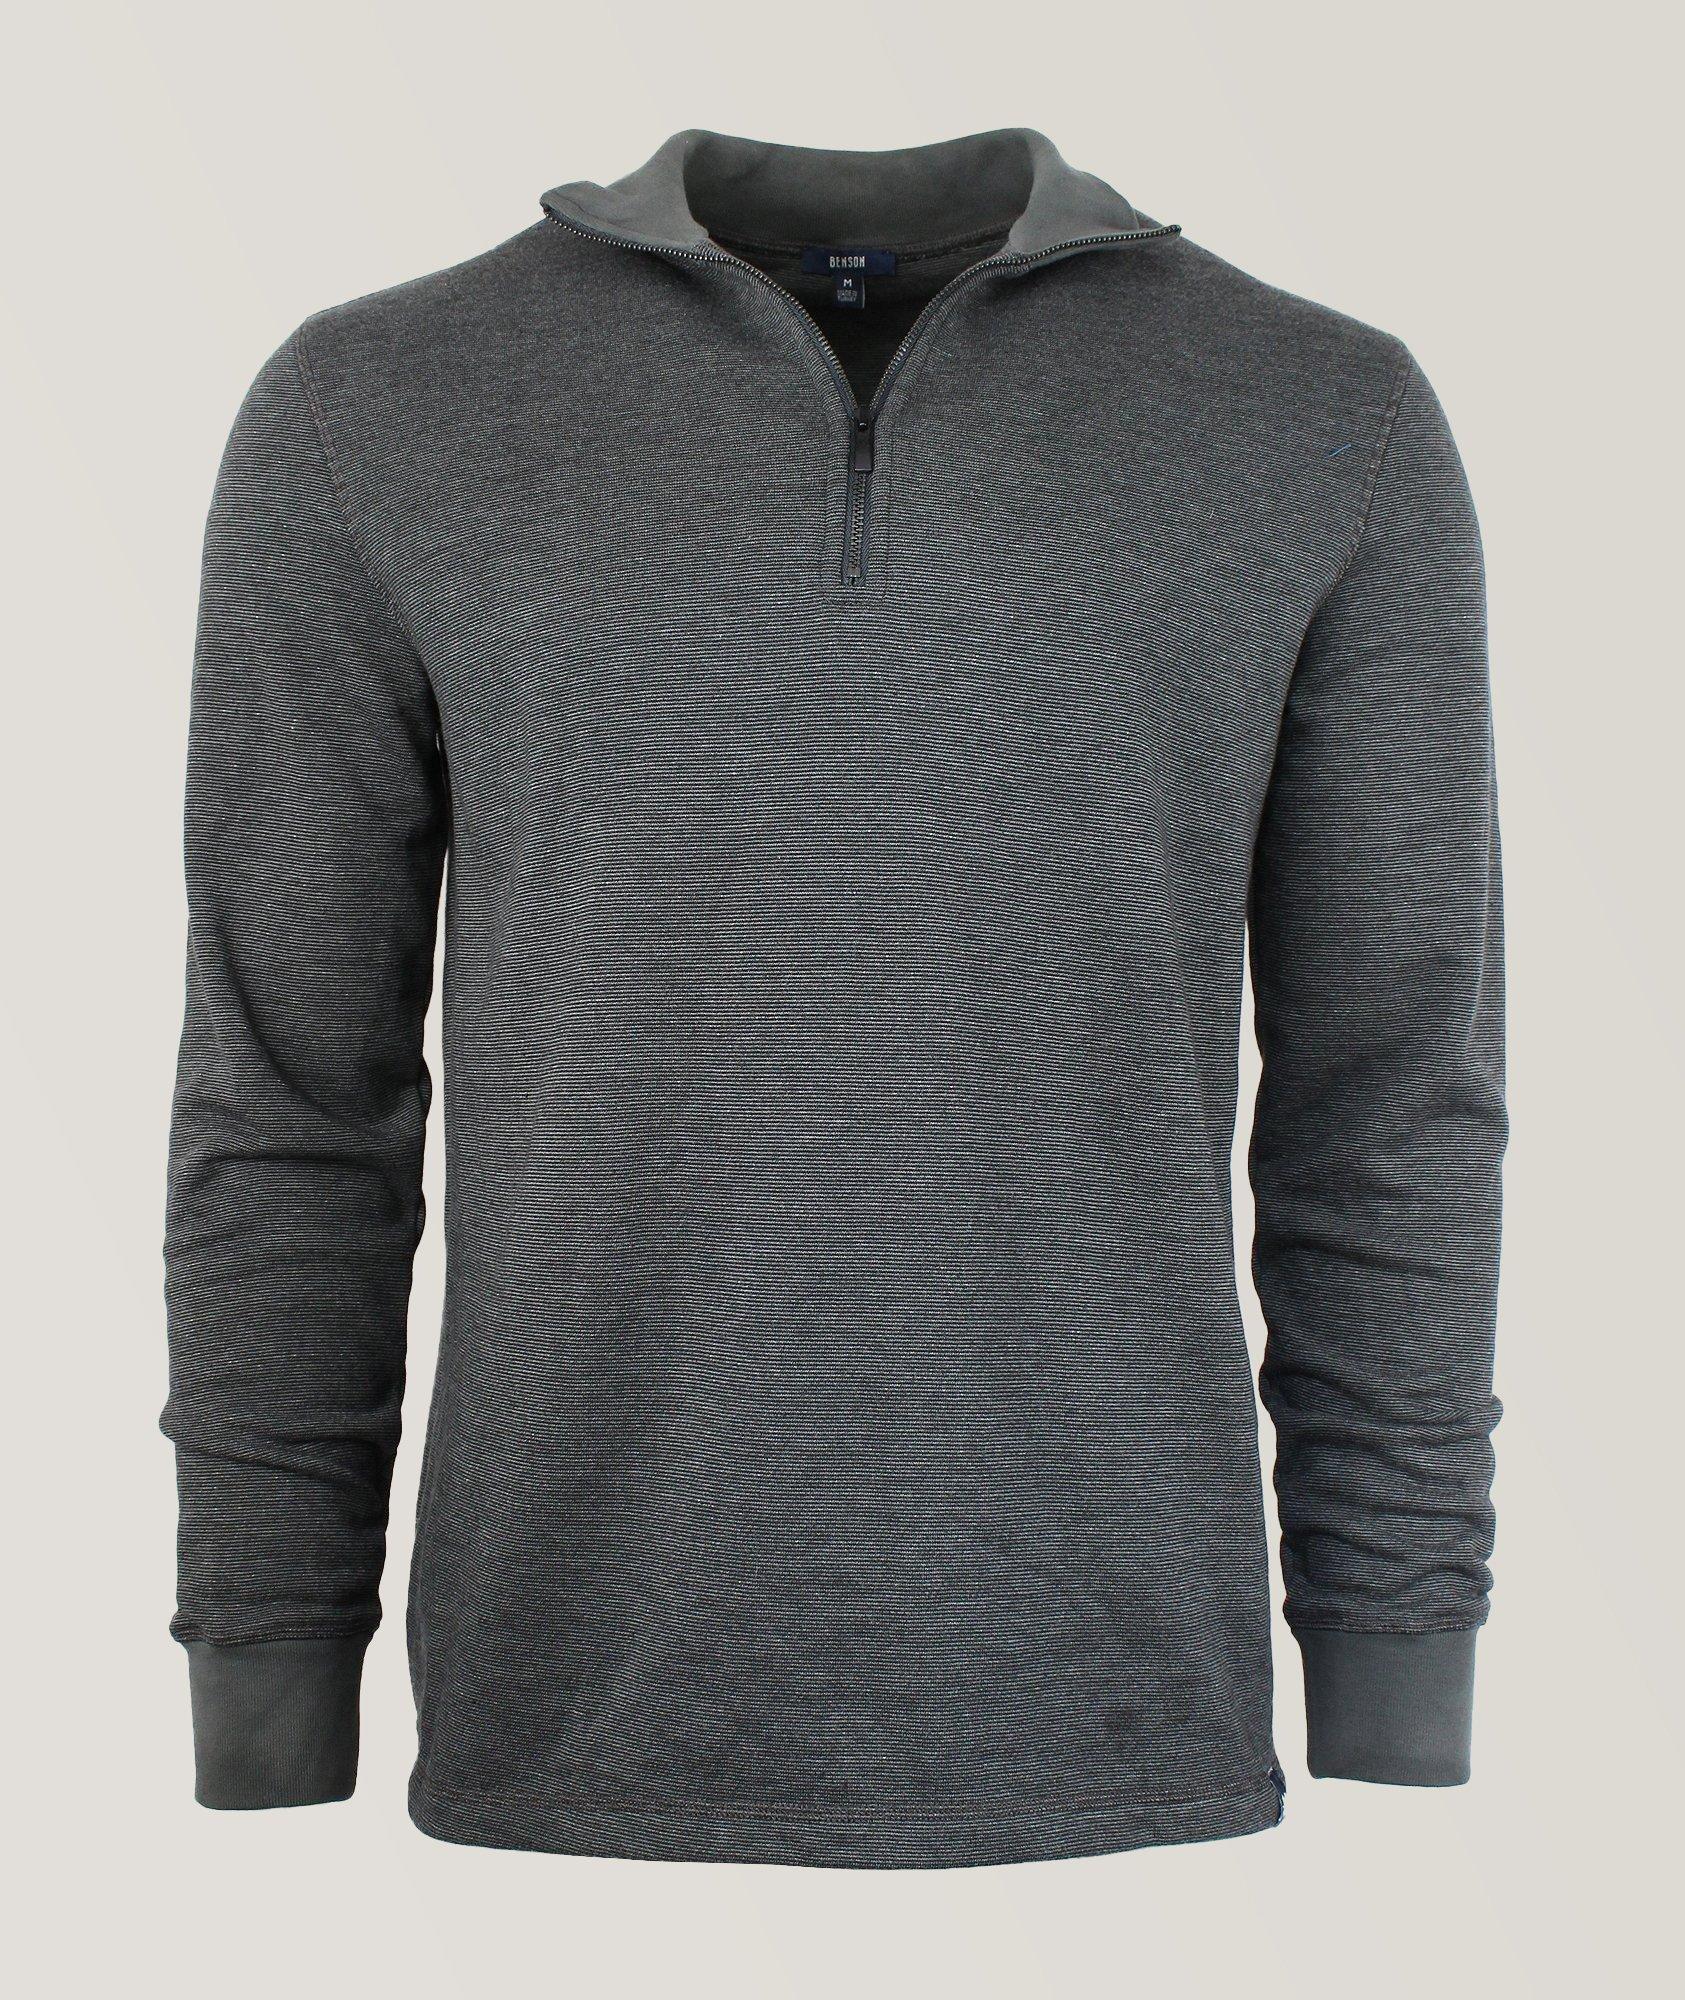 Cypress French Terry 1/4 Zip image 0